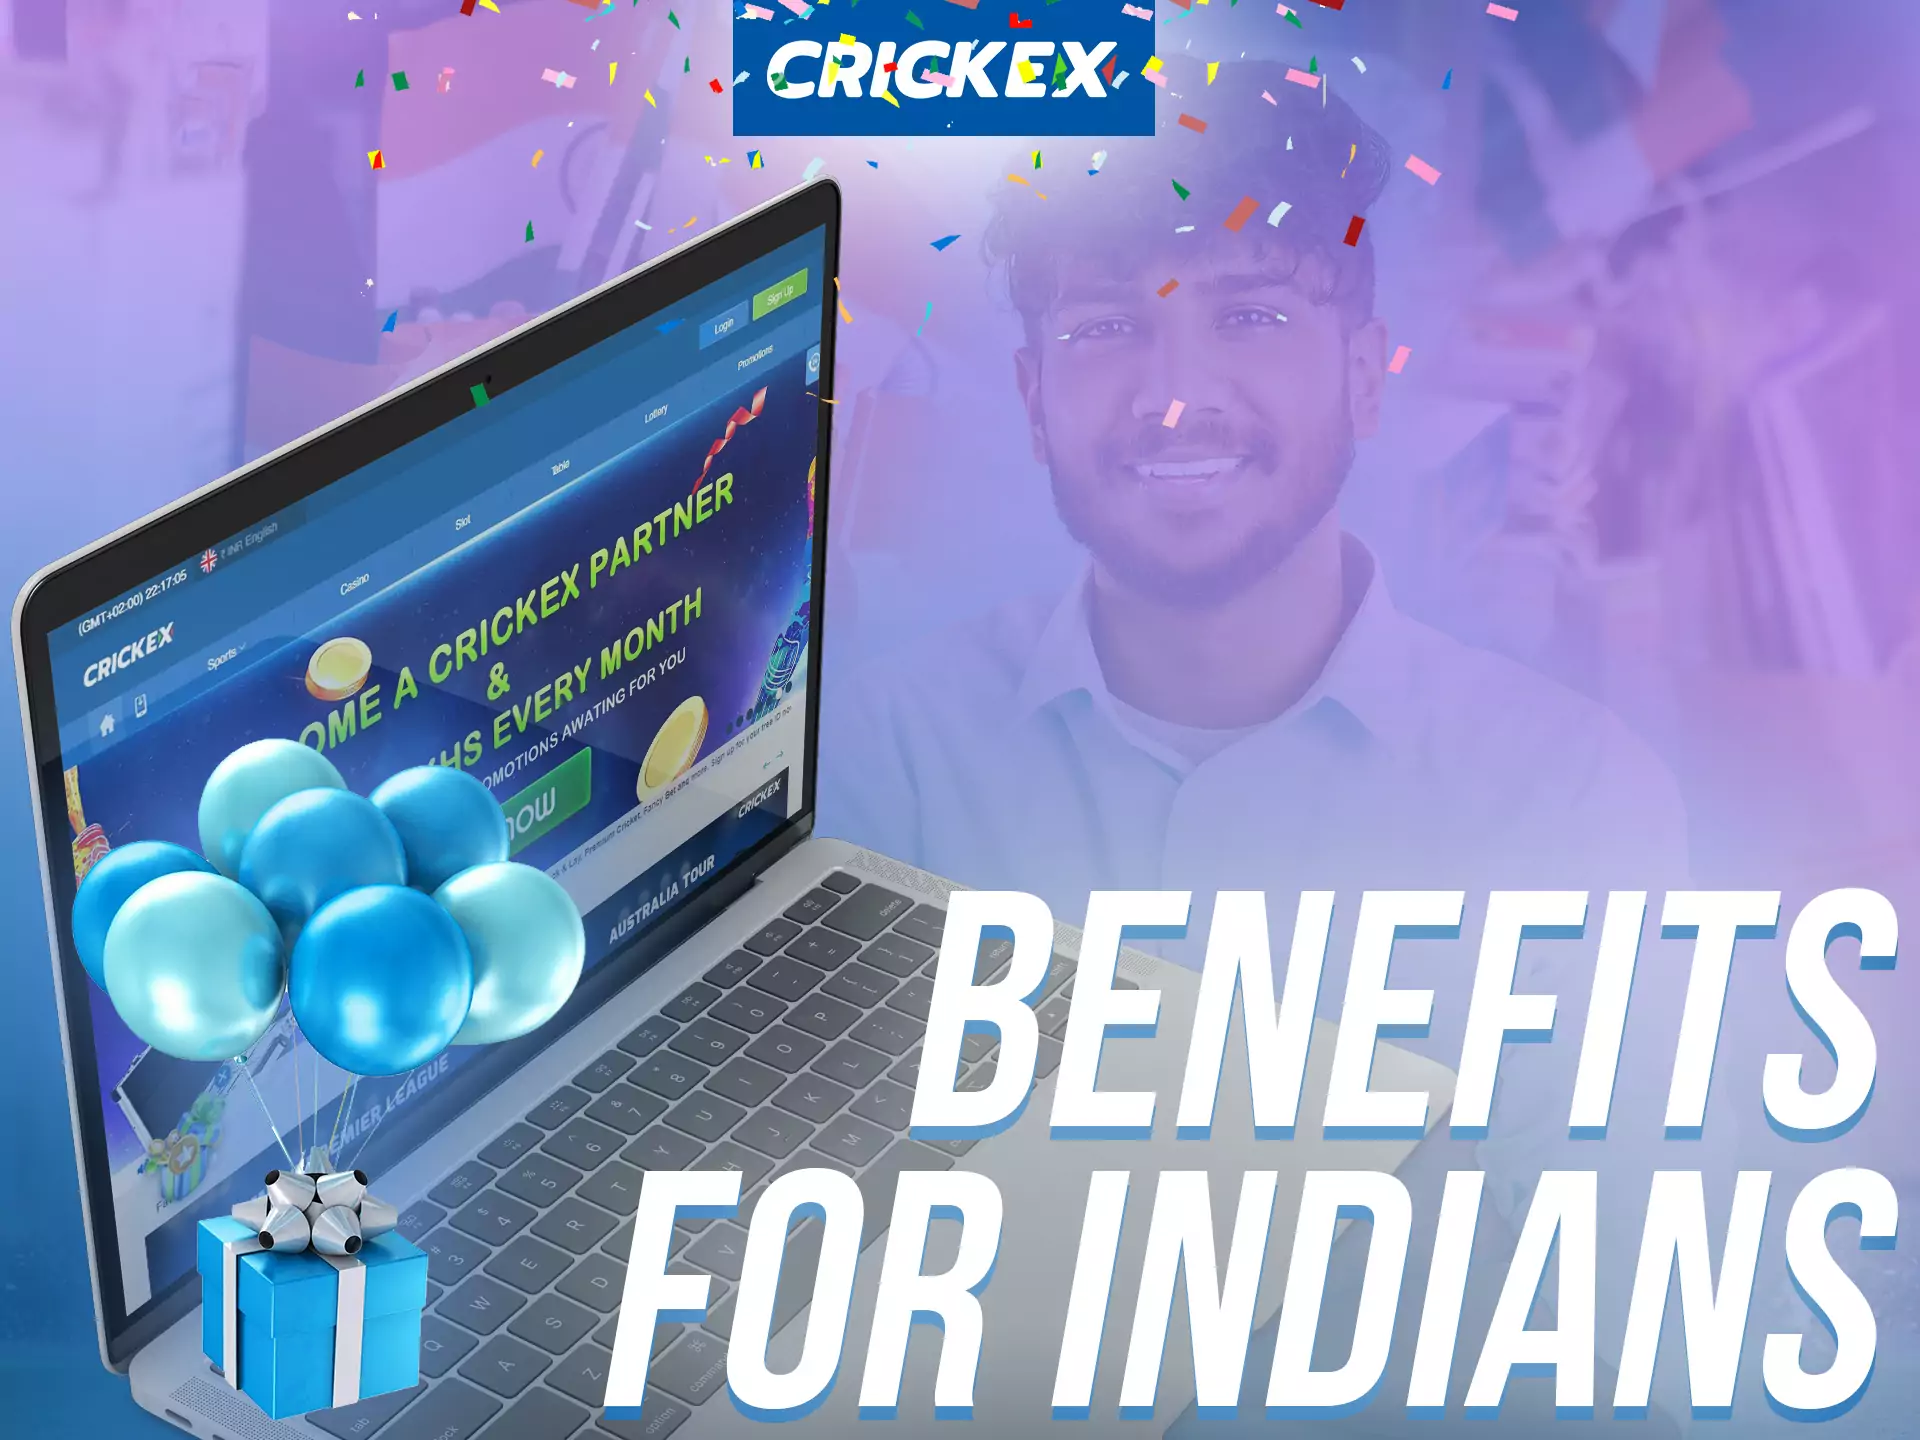 At Crickex, all players from India can count on special bonuses.